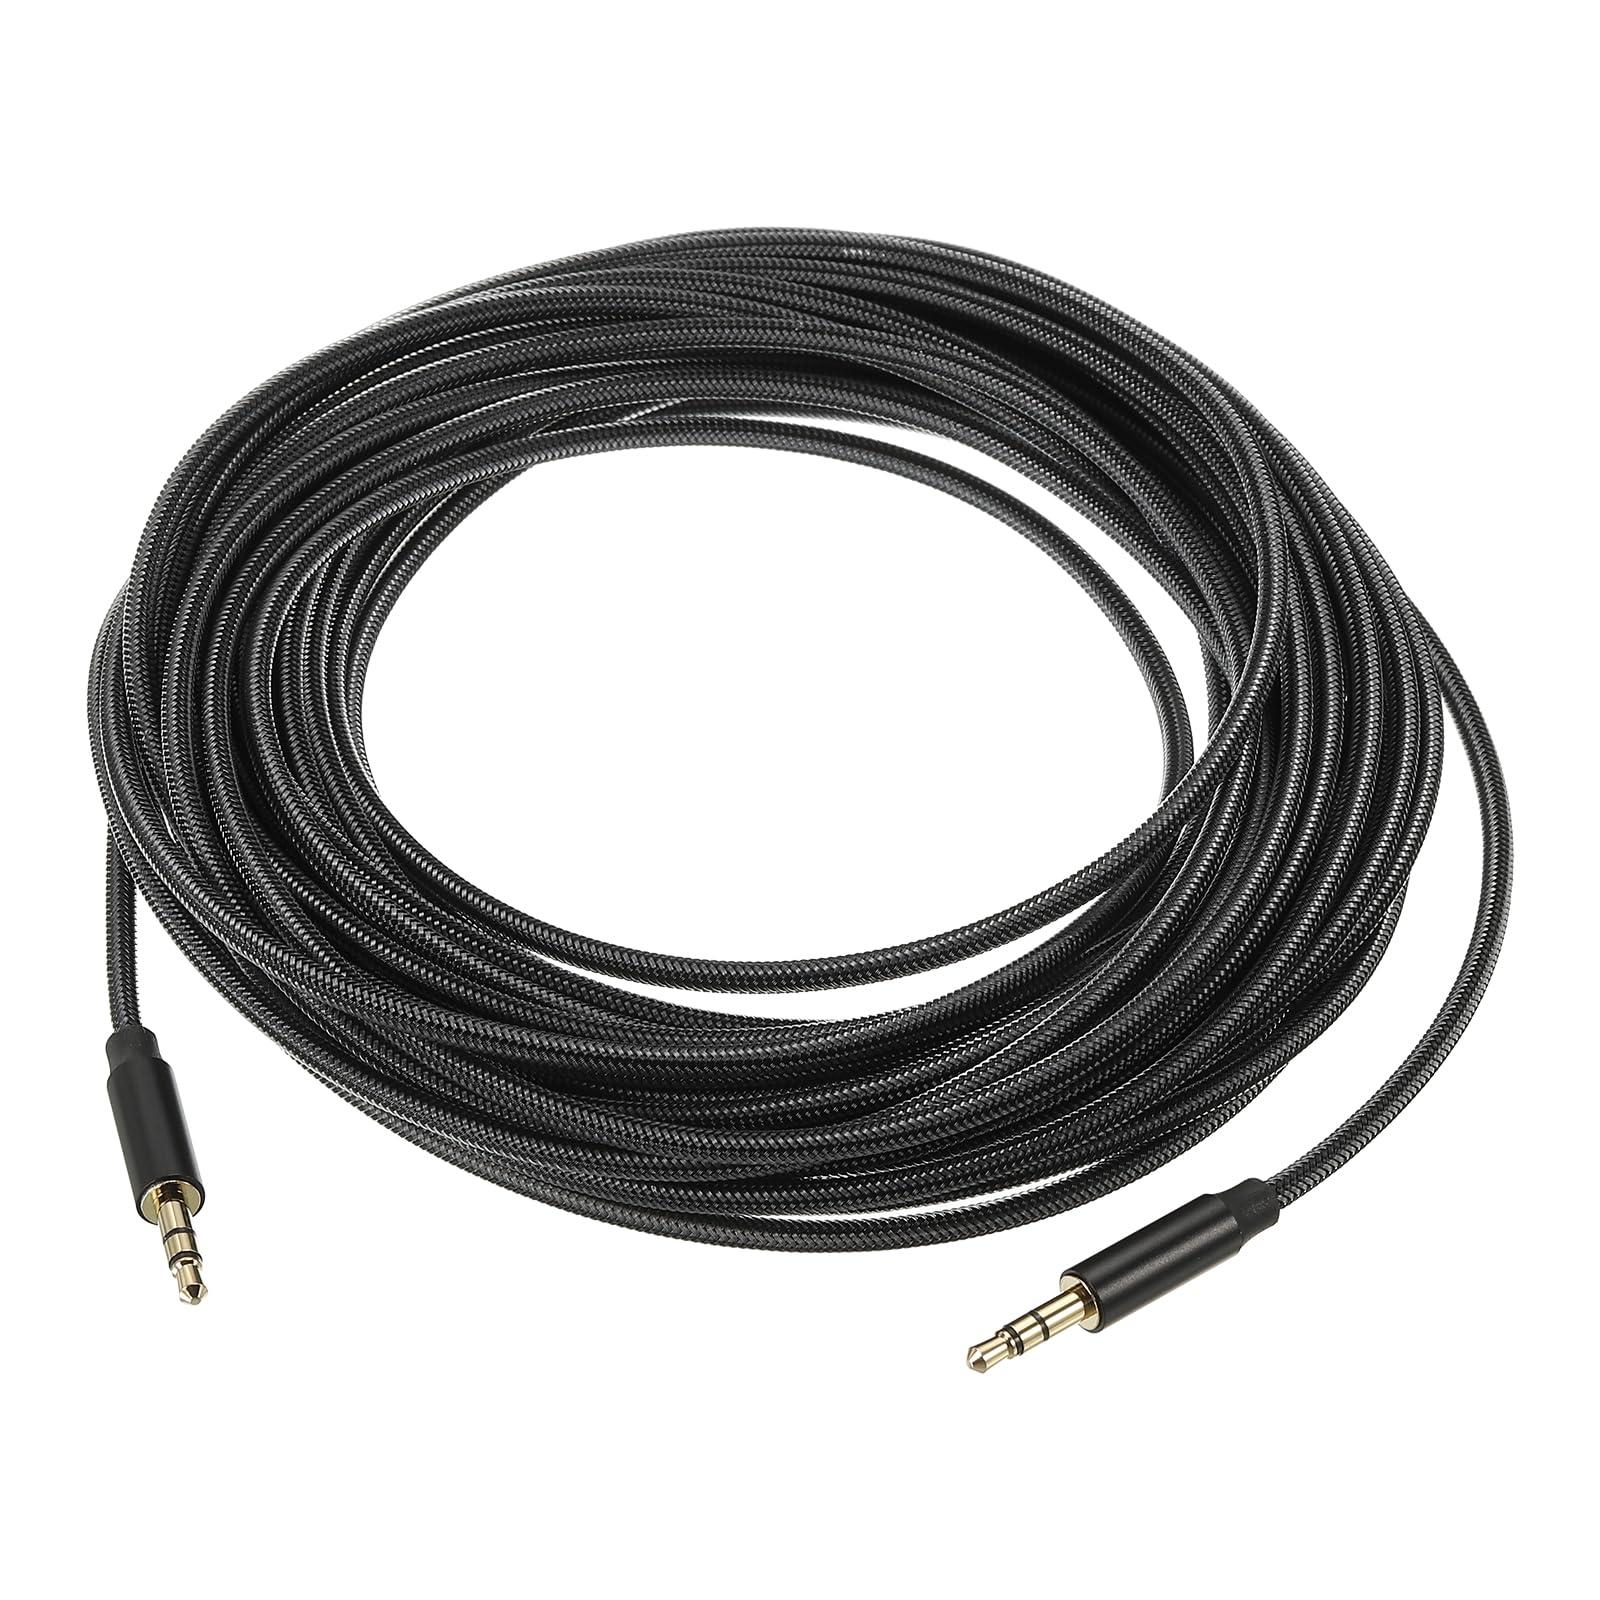 sourcing map 3.5mm Aux Cable Male to Male Auxiliary Audio Cable HiFi Headphone Cord 33ft Nylon Braided for Phone Headphone Speaker Stereo, Black